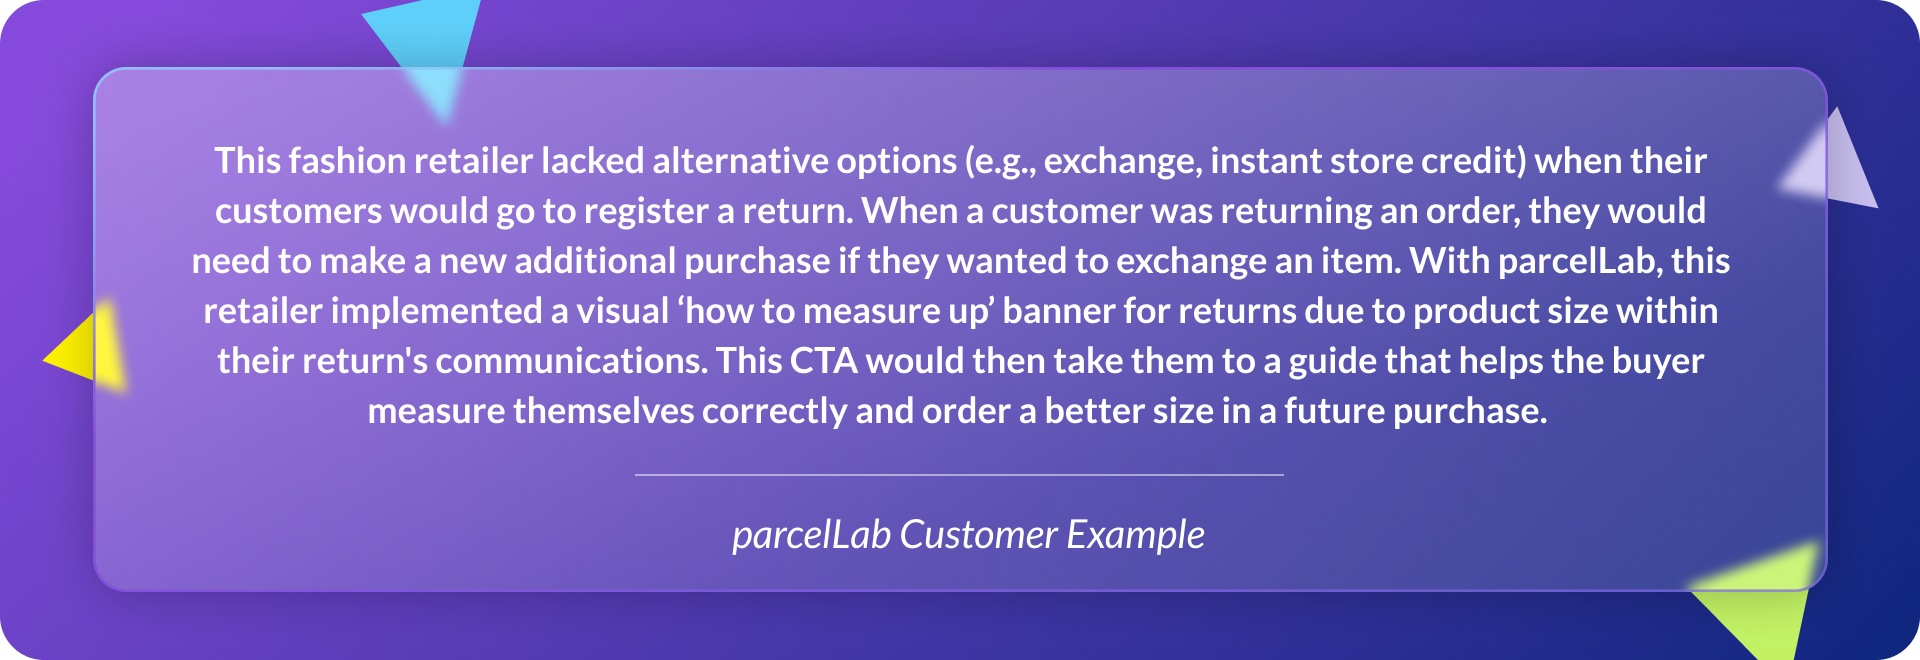 parcelLab customer example showing how retailers can recover revenue by providing exchange or instant store credit options during the online returns process.